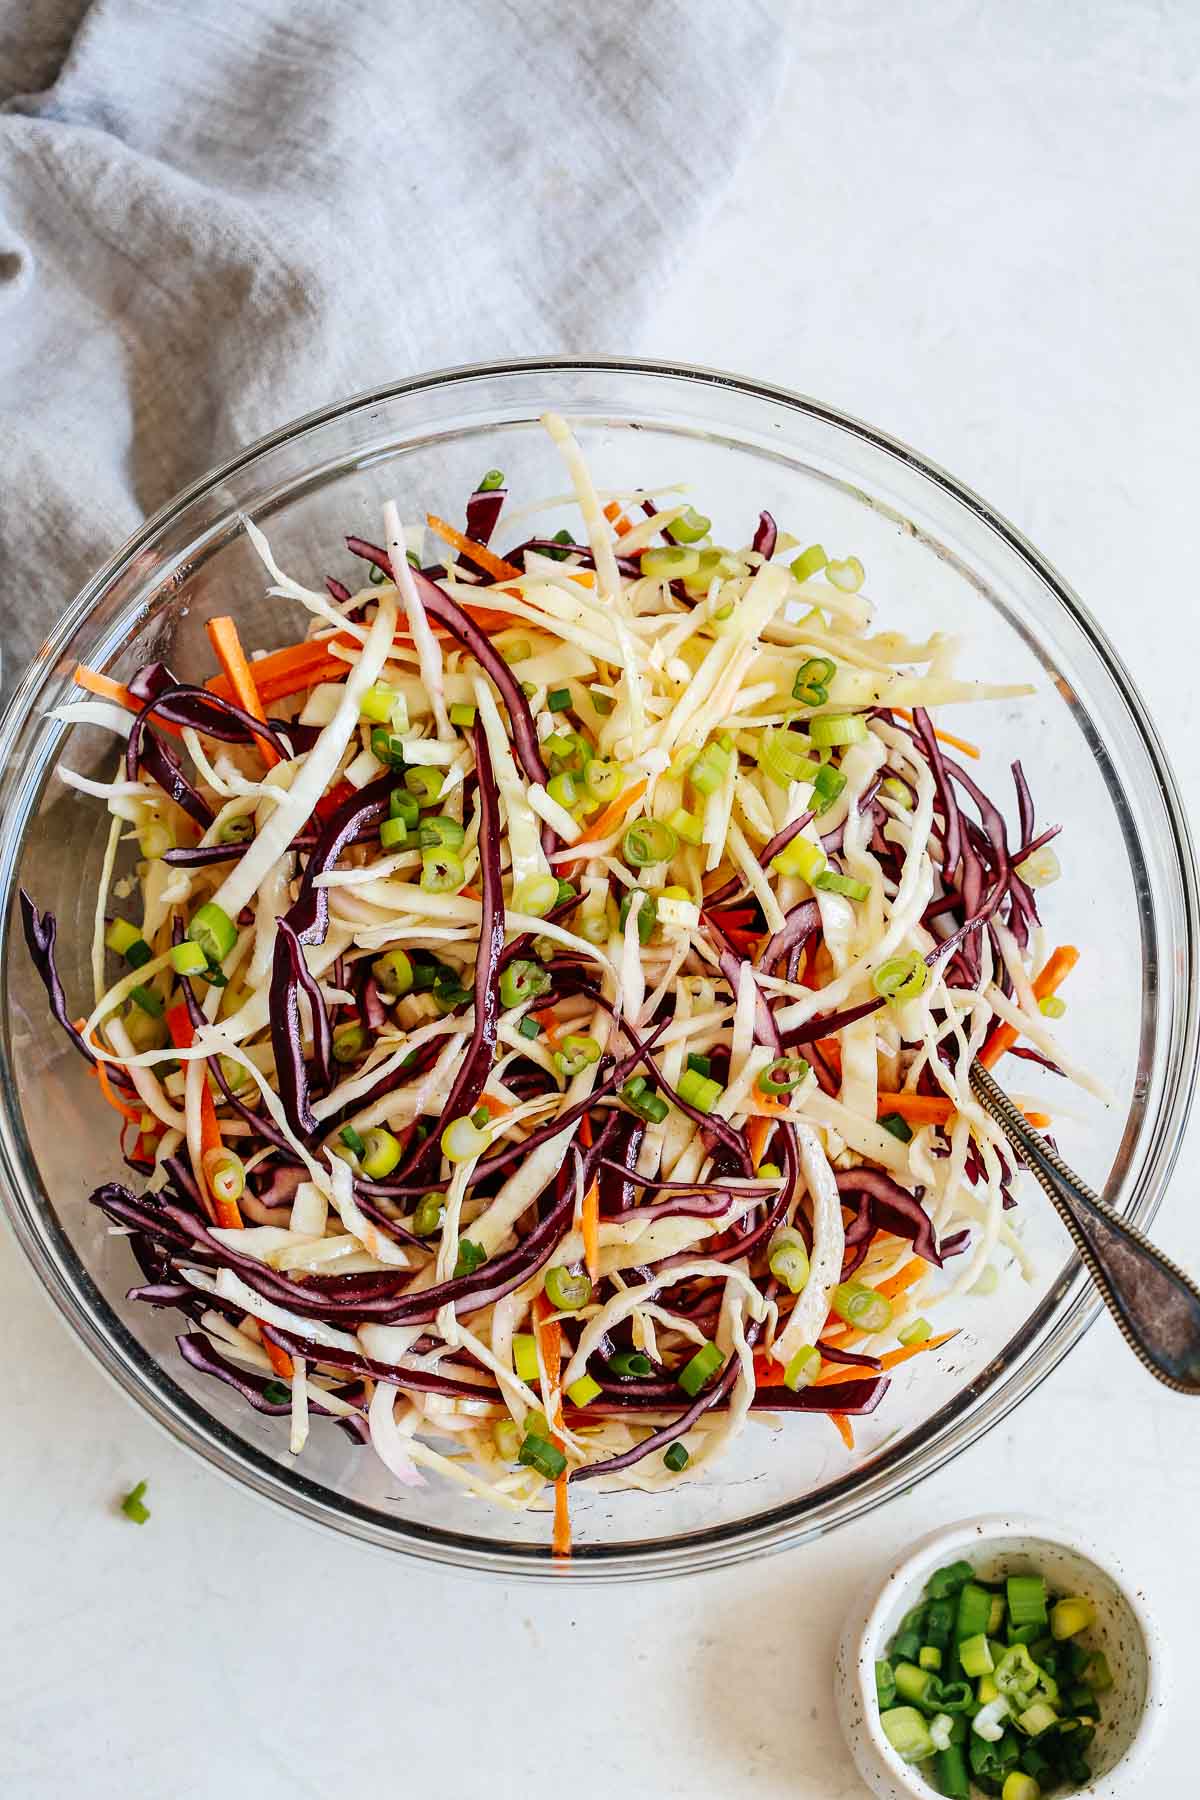 shredded vegetables and a spoon in a bowl sitting on a white towel